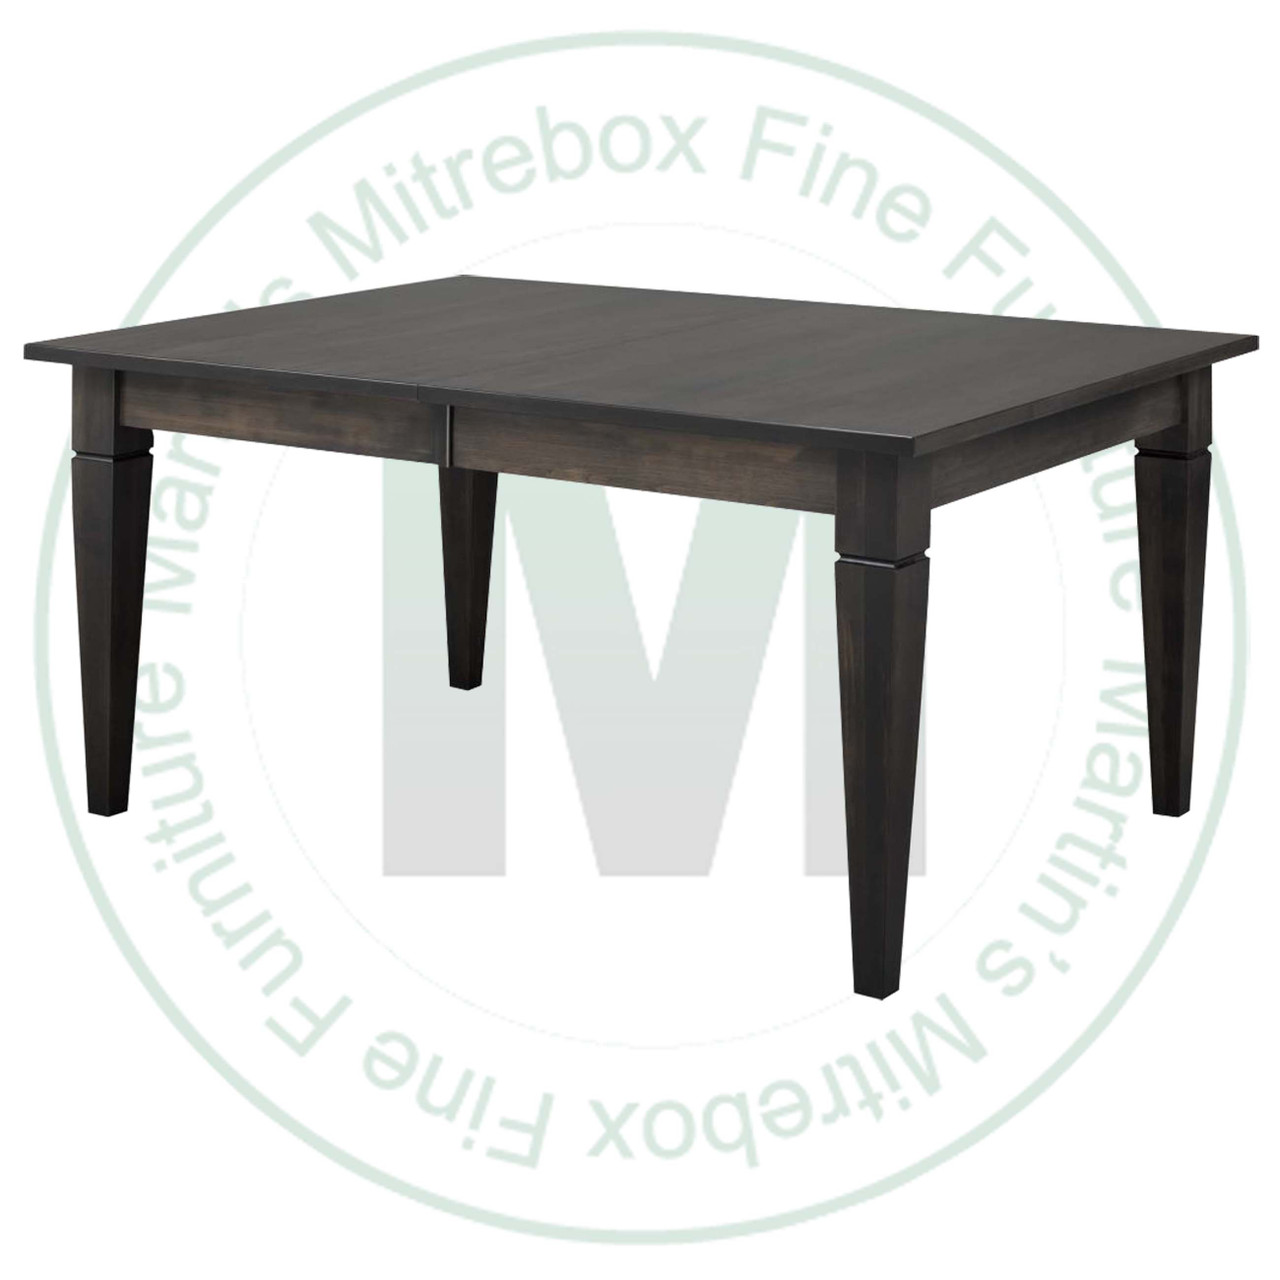 Maple Reesor Extension Harvest Table 36''D x 48''W x 30''H With 3 - 12'' Leaves Table Has 1'' Thick Top